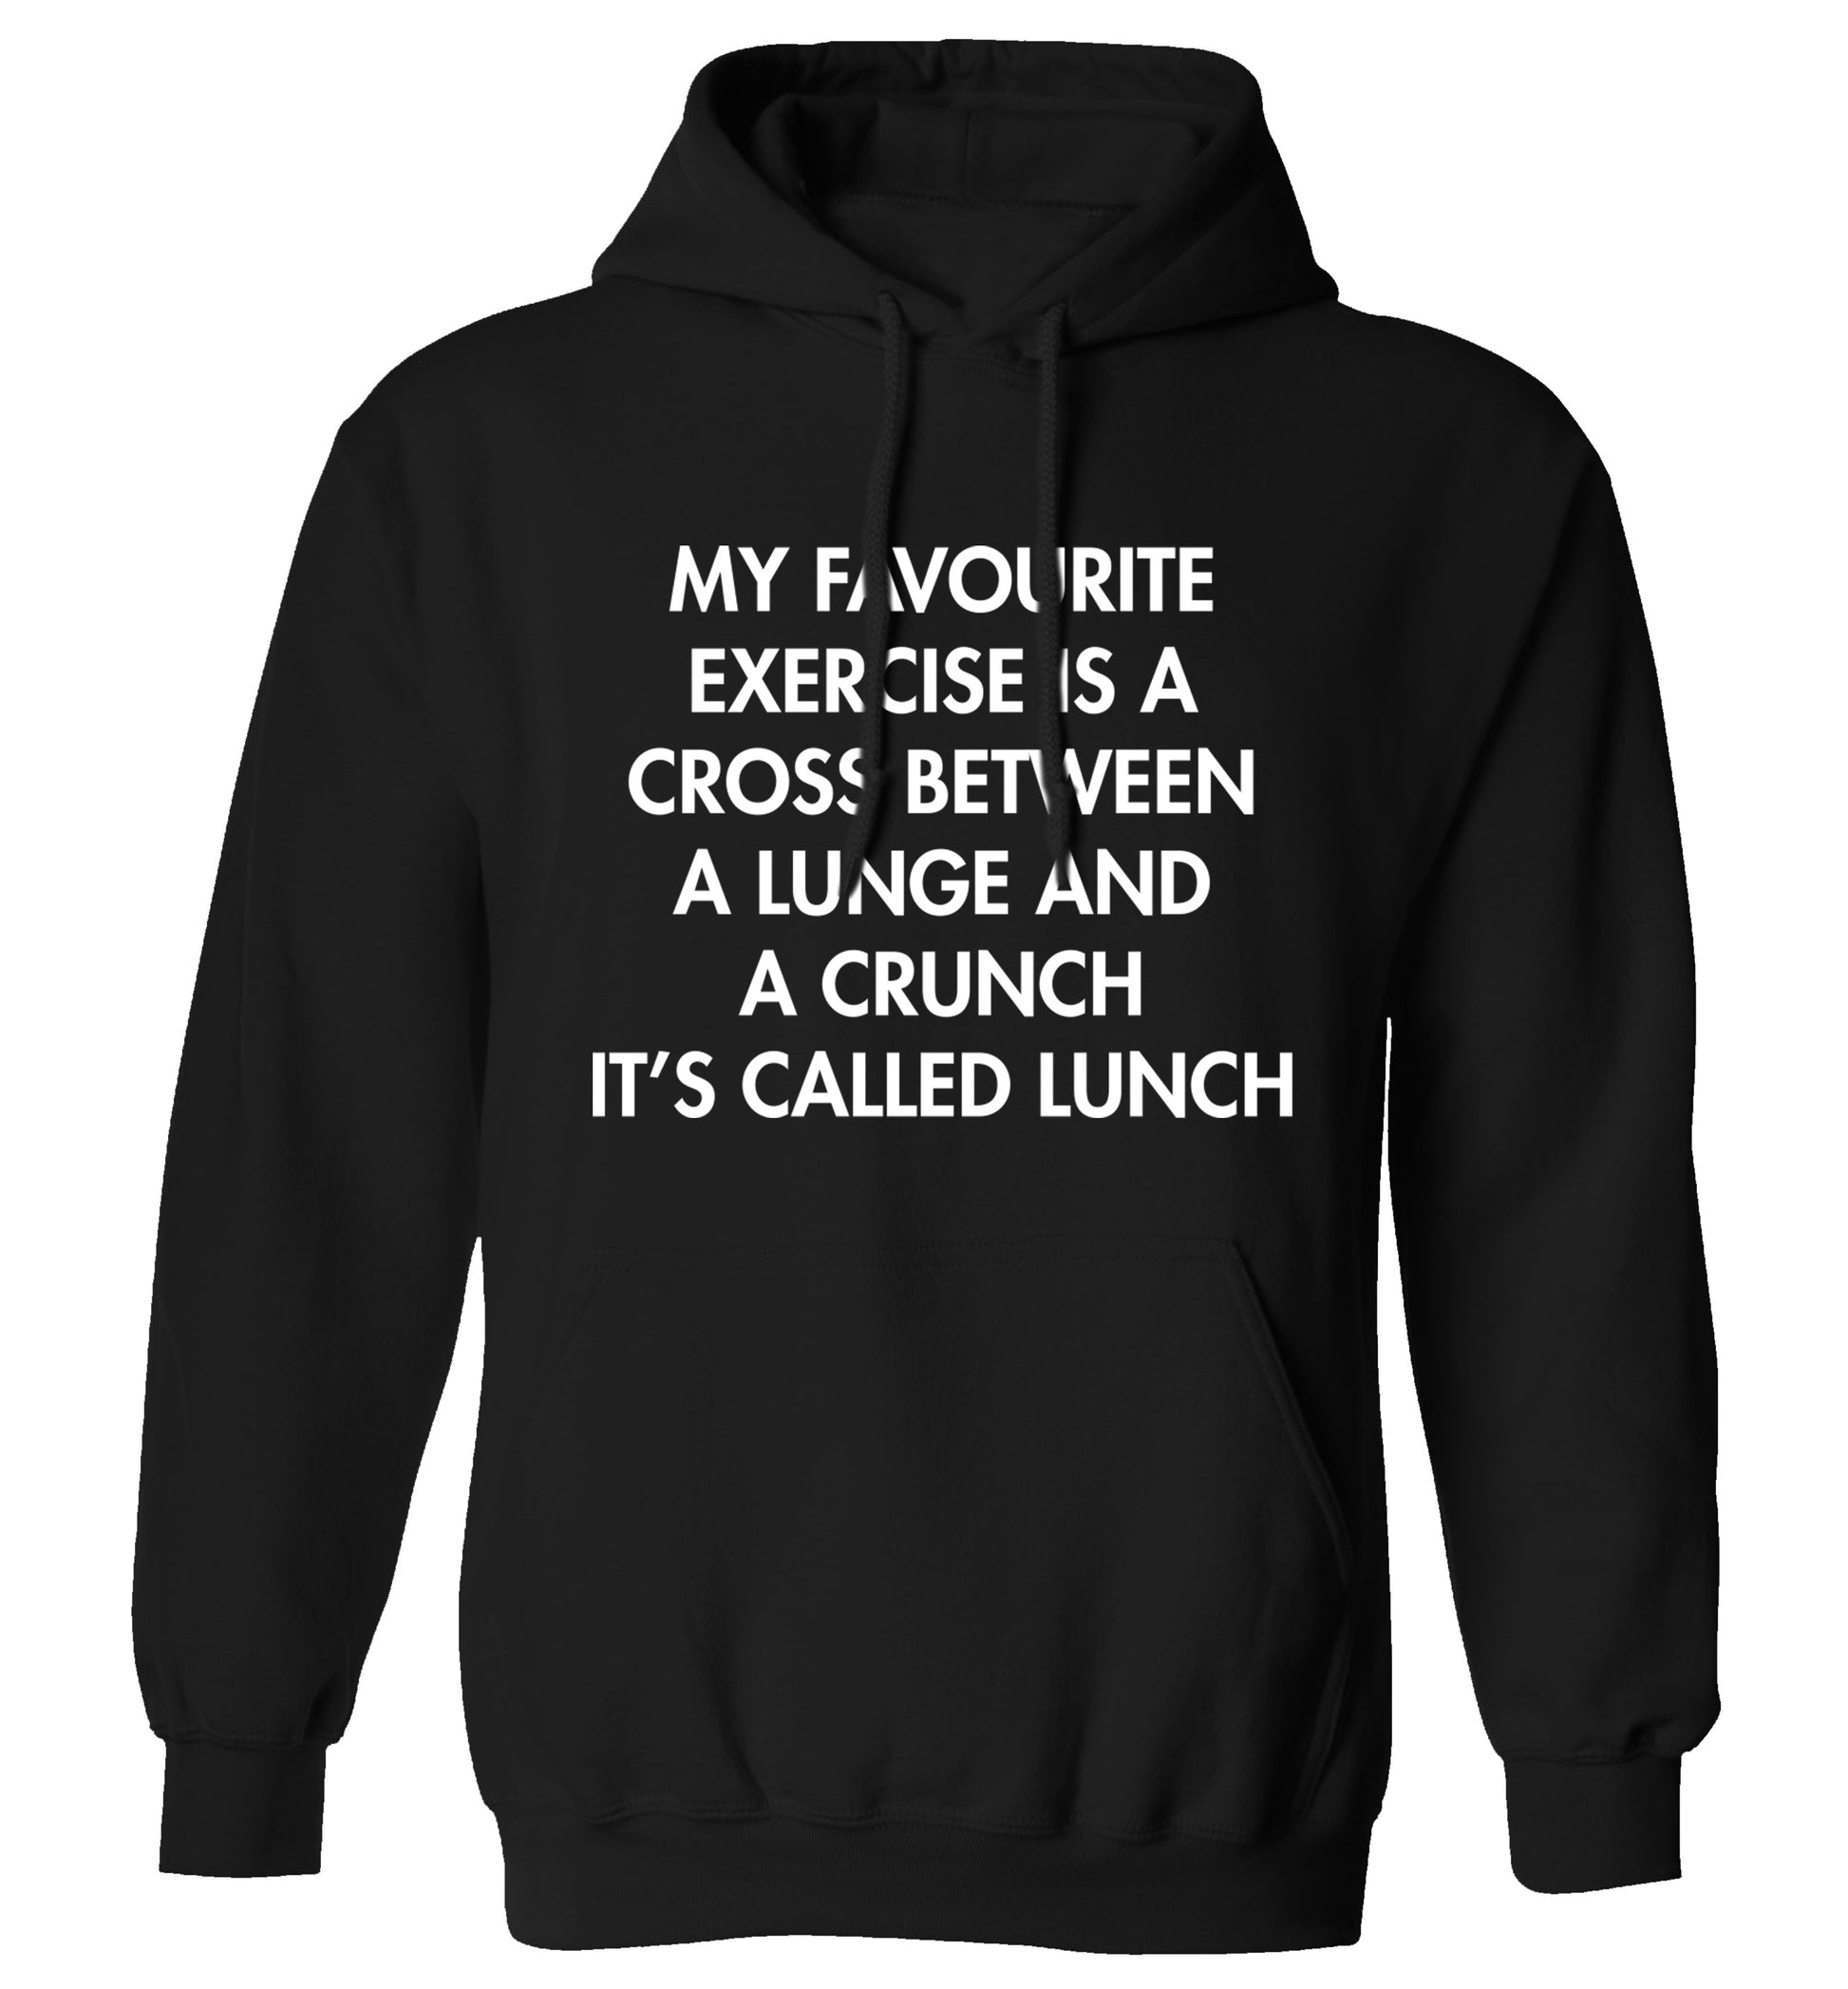 My favourite exercise is a cross between a lung and a crunch it's called lunch adults unisex black hoodie 2XL